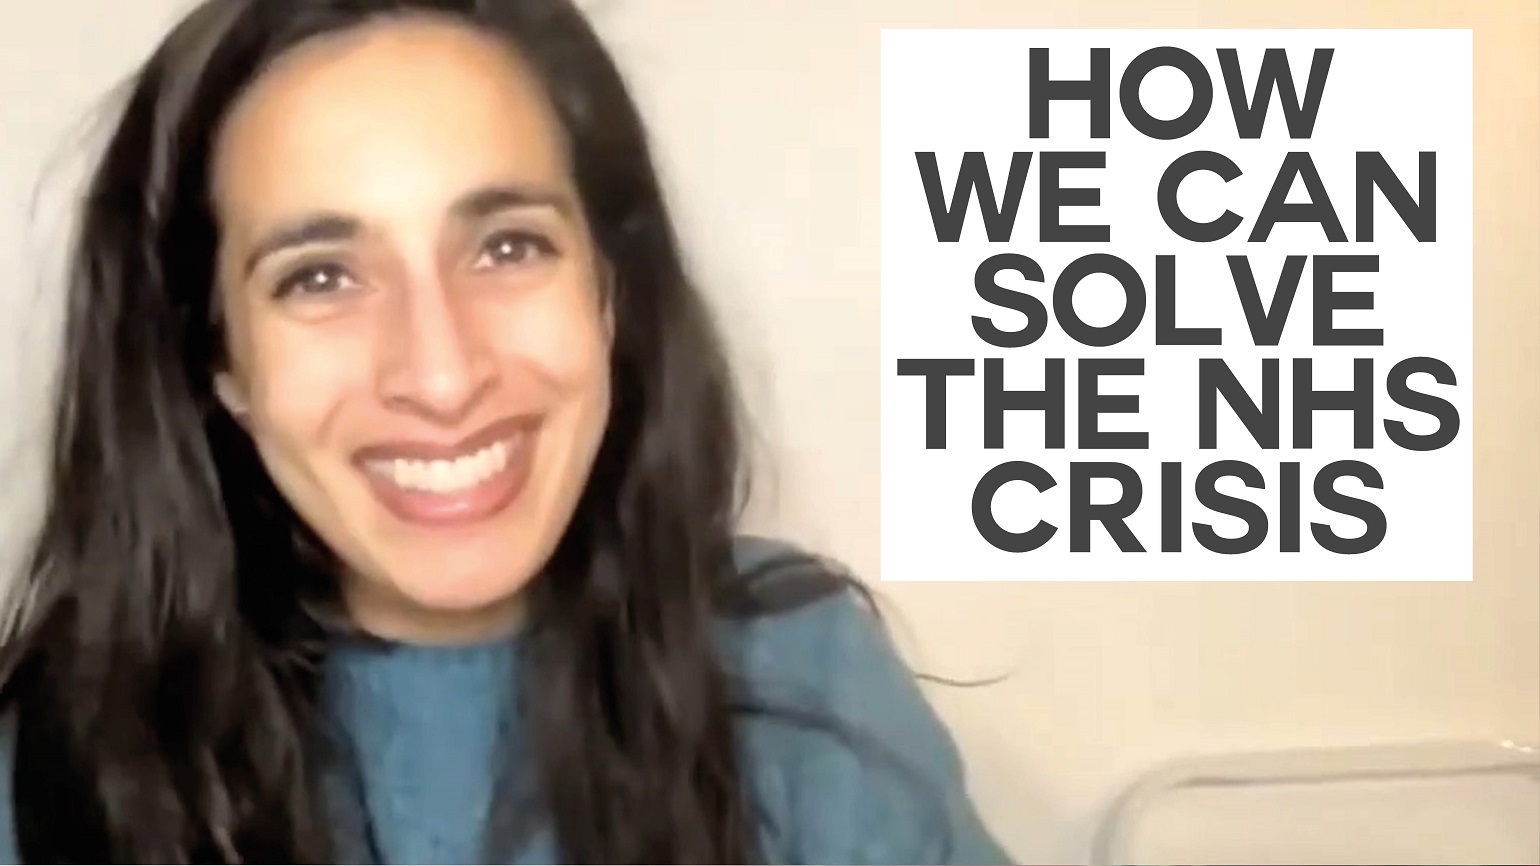 A still of an interview with Sonia Adesara with text reading "How we can solve the NHS crisis"